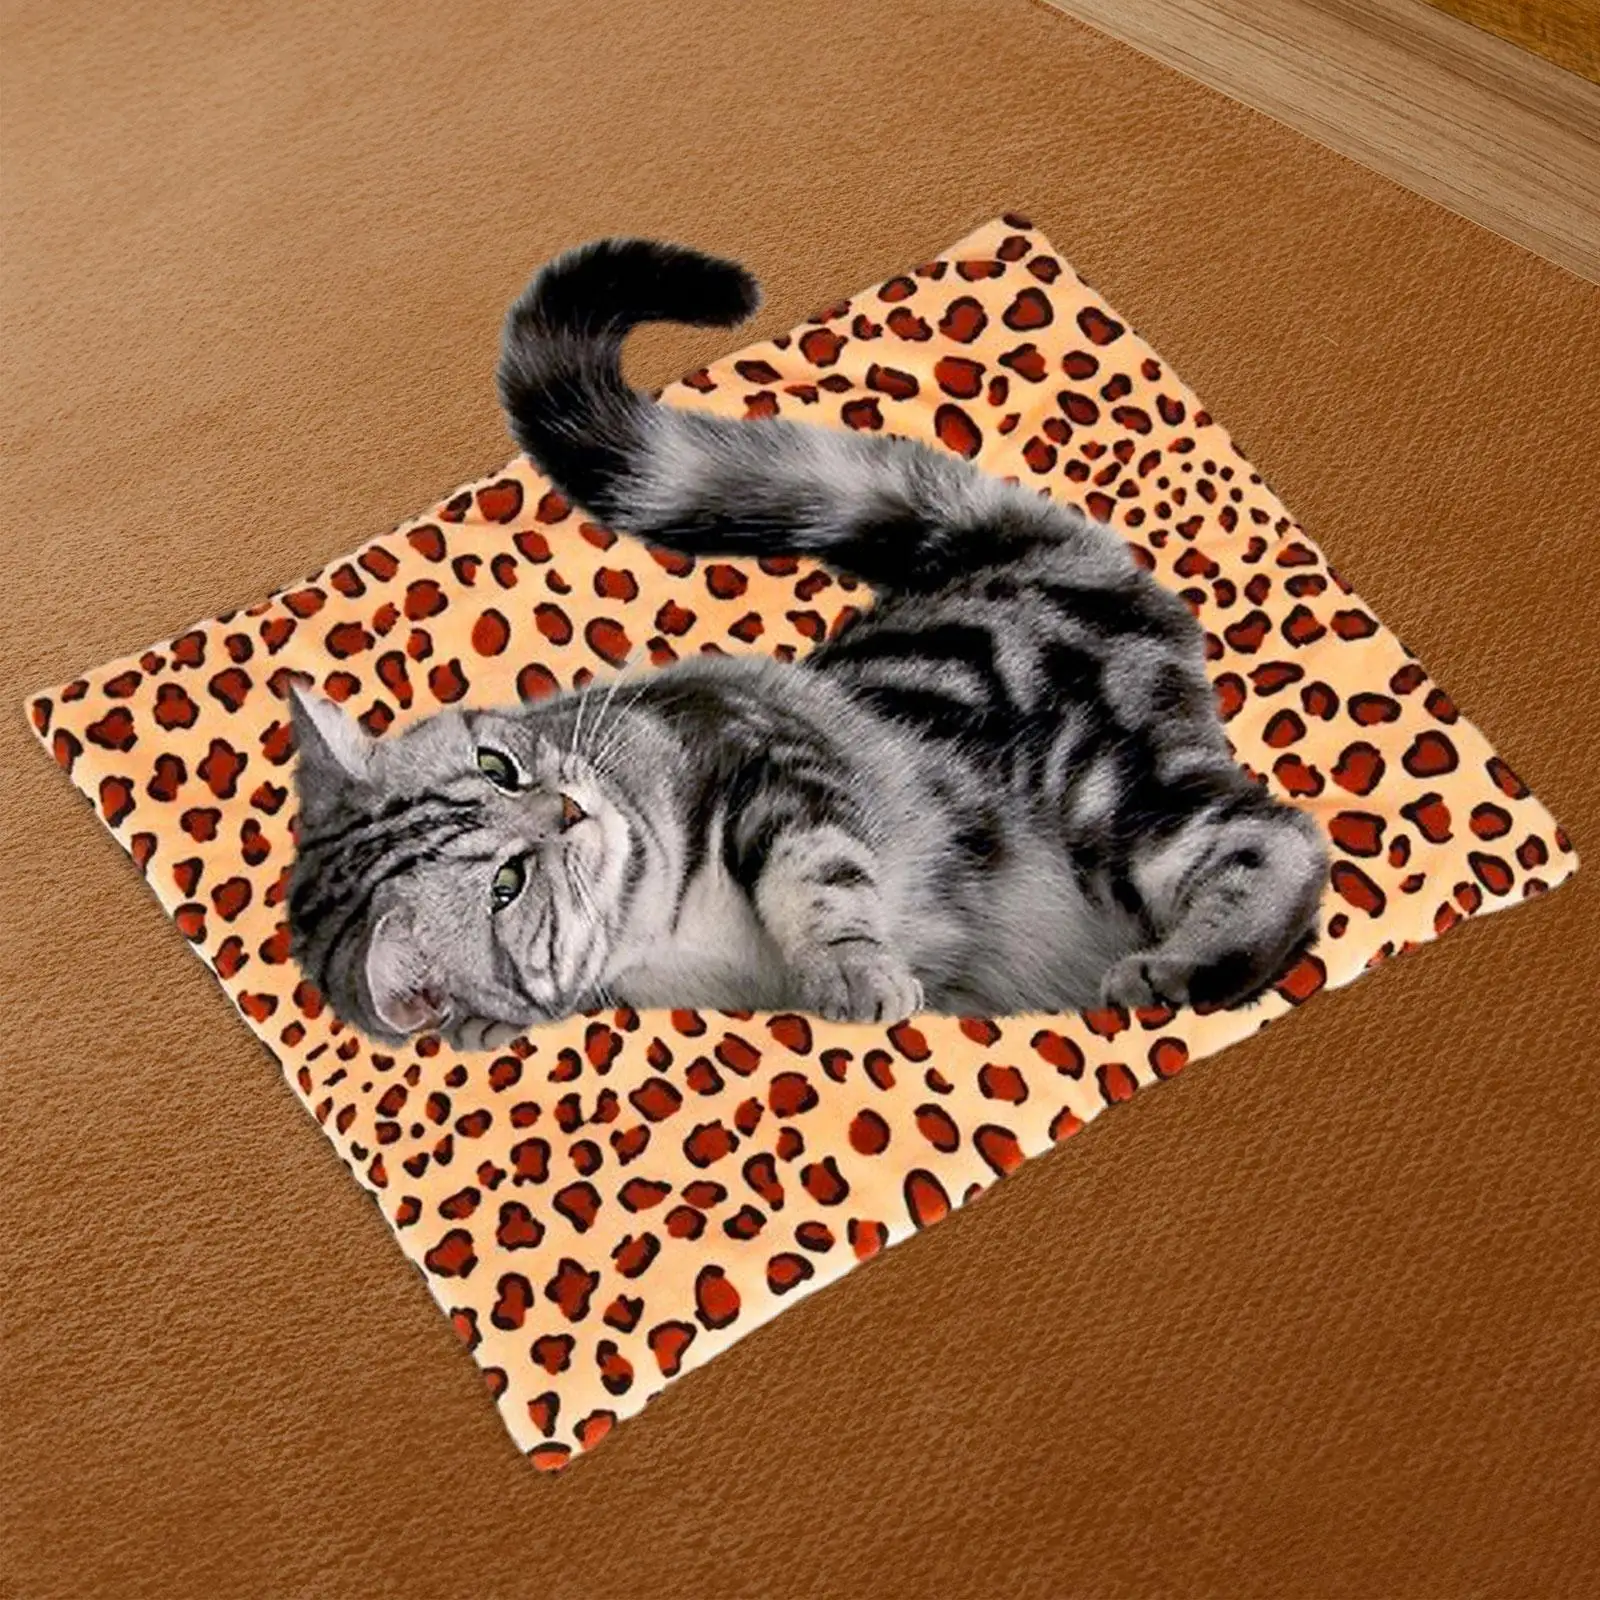 Pet Heating Pads Adjustable Temperature Kennel Pad Winter Warm Washable Cats Dogs Warmer Bed for Indoor Outdoor Kitten Resting